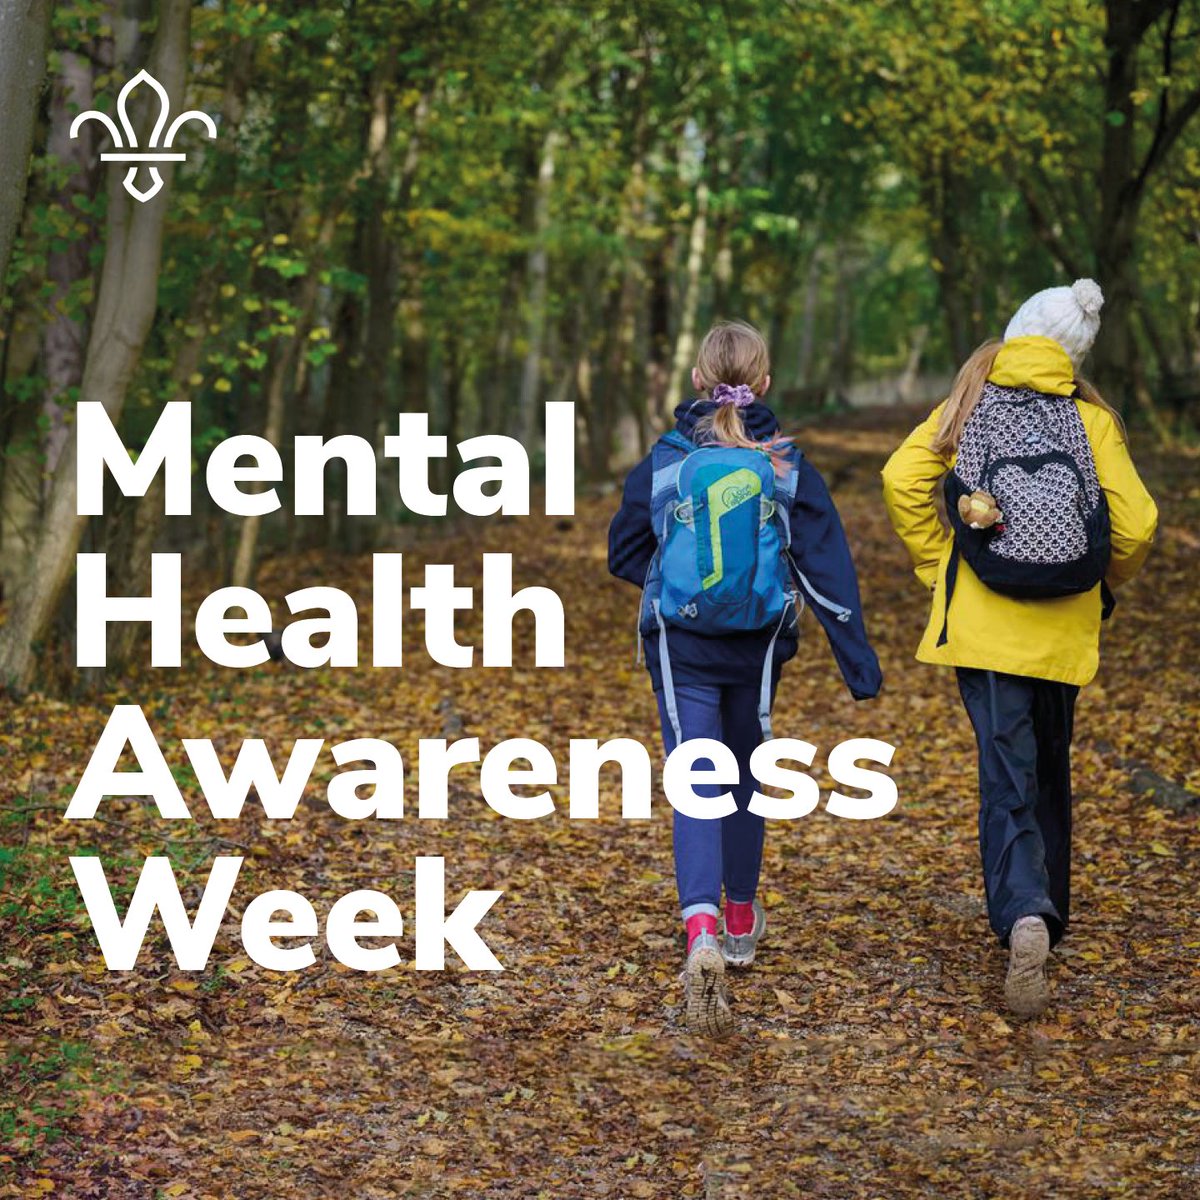 RT scouts 'It's Mental Health Awareness Week. Head outside, take a deep breath, and pay attention to the moment as you practice mindfulness and connect to the natural world: bit.ly/3O9tdZ2 '